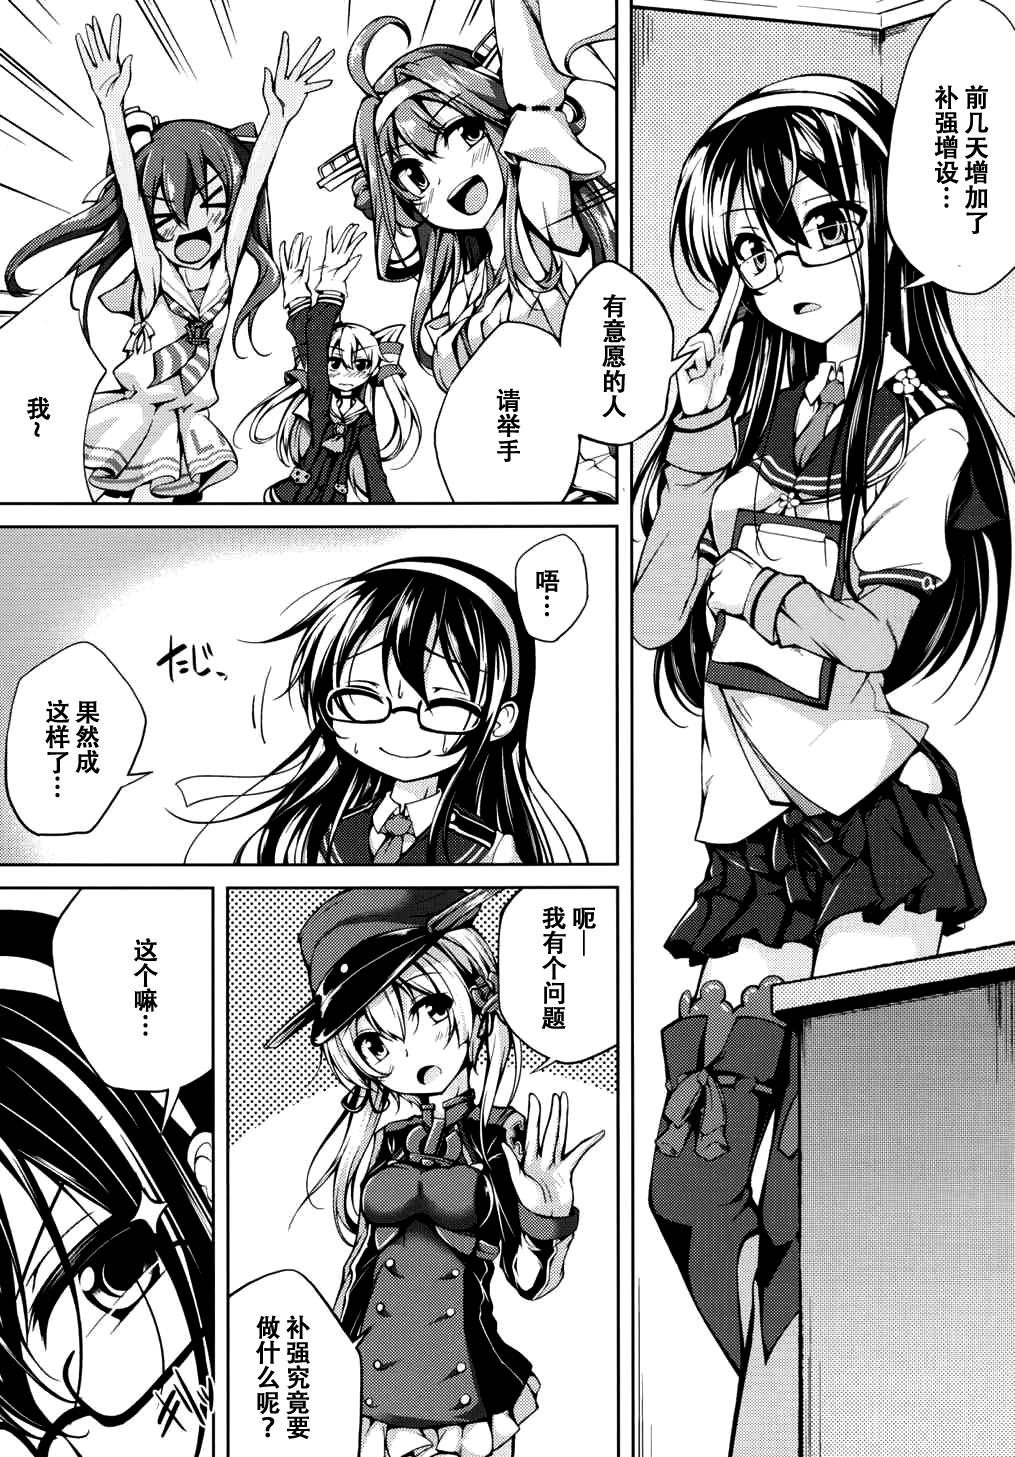 This Koiiro Moyou 14 - Kantai collection Spooning - Page 3